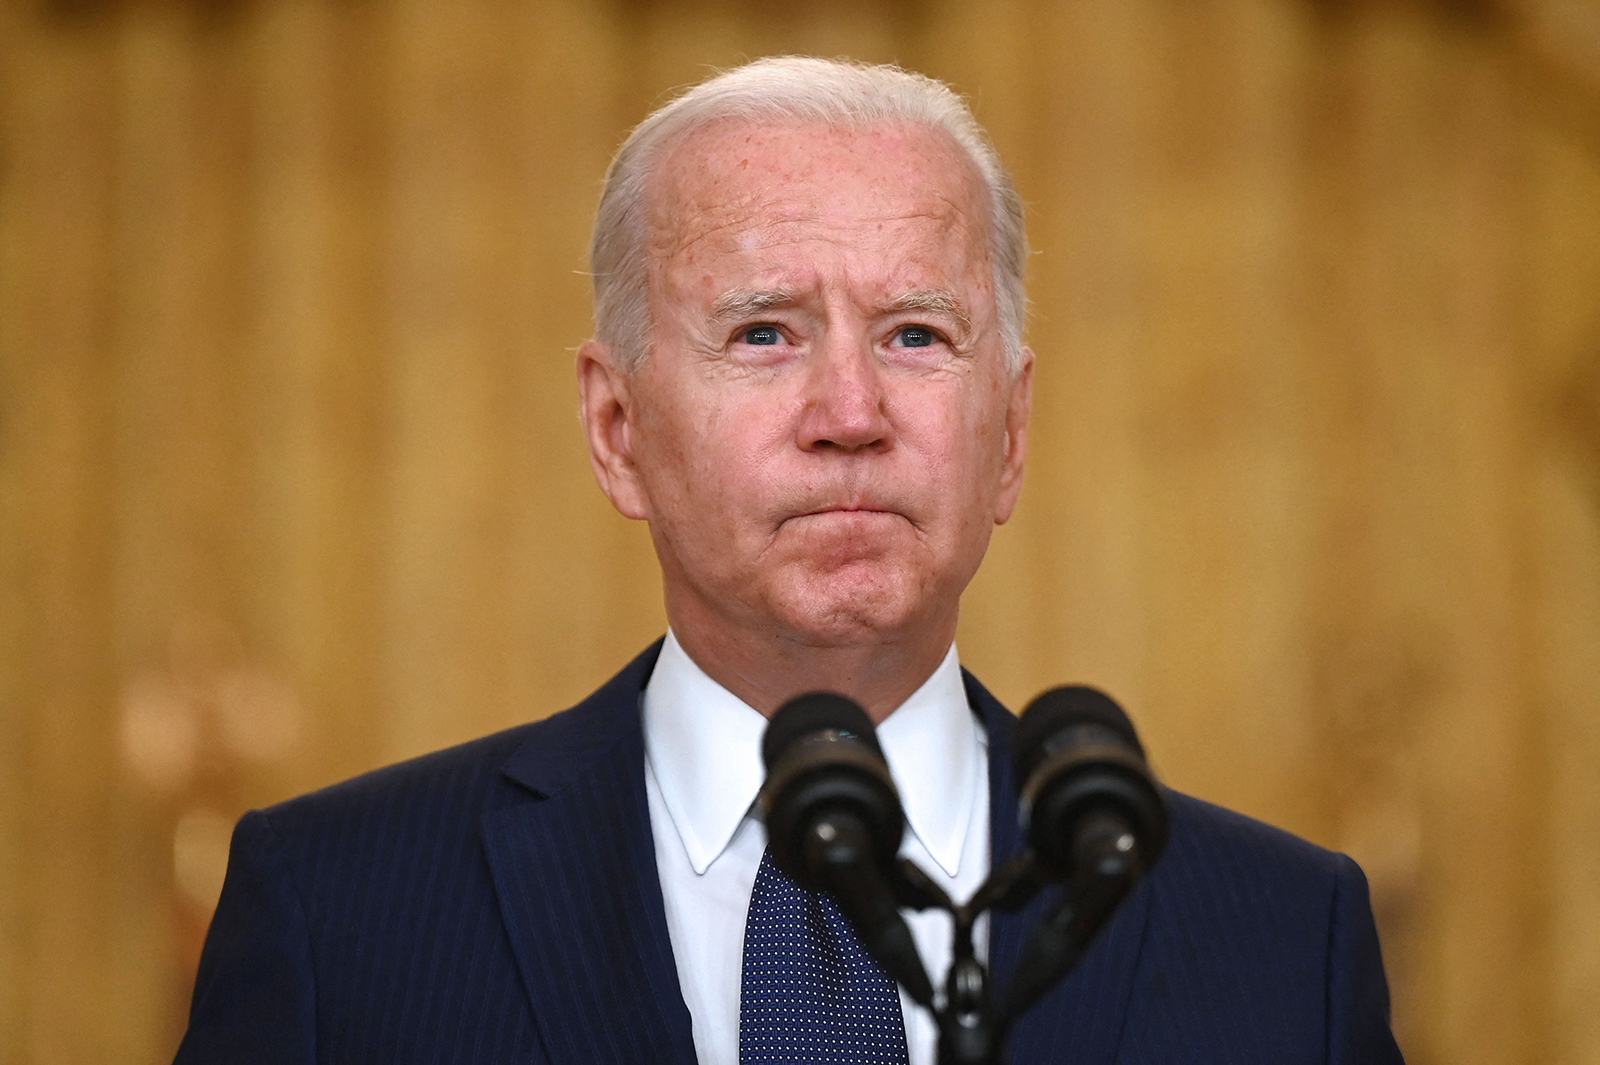 President Joe Biden delivers remarks on the terror attack at Hamid Karzai International Airport, and the US service members and Afghan victims killed and wounded, in the East Room of the White House in Washington on August 26.